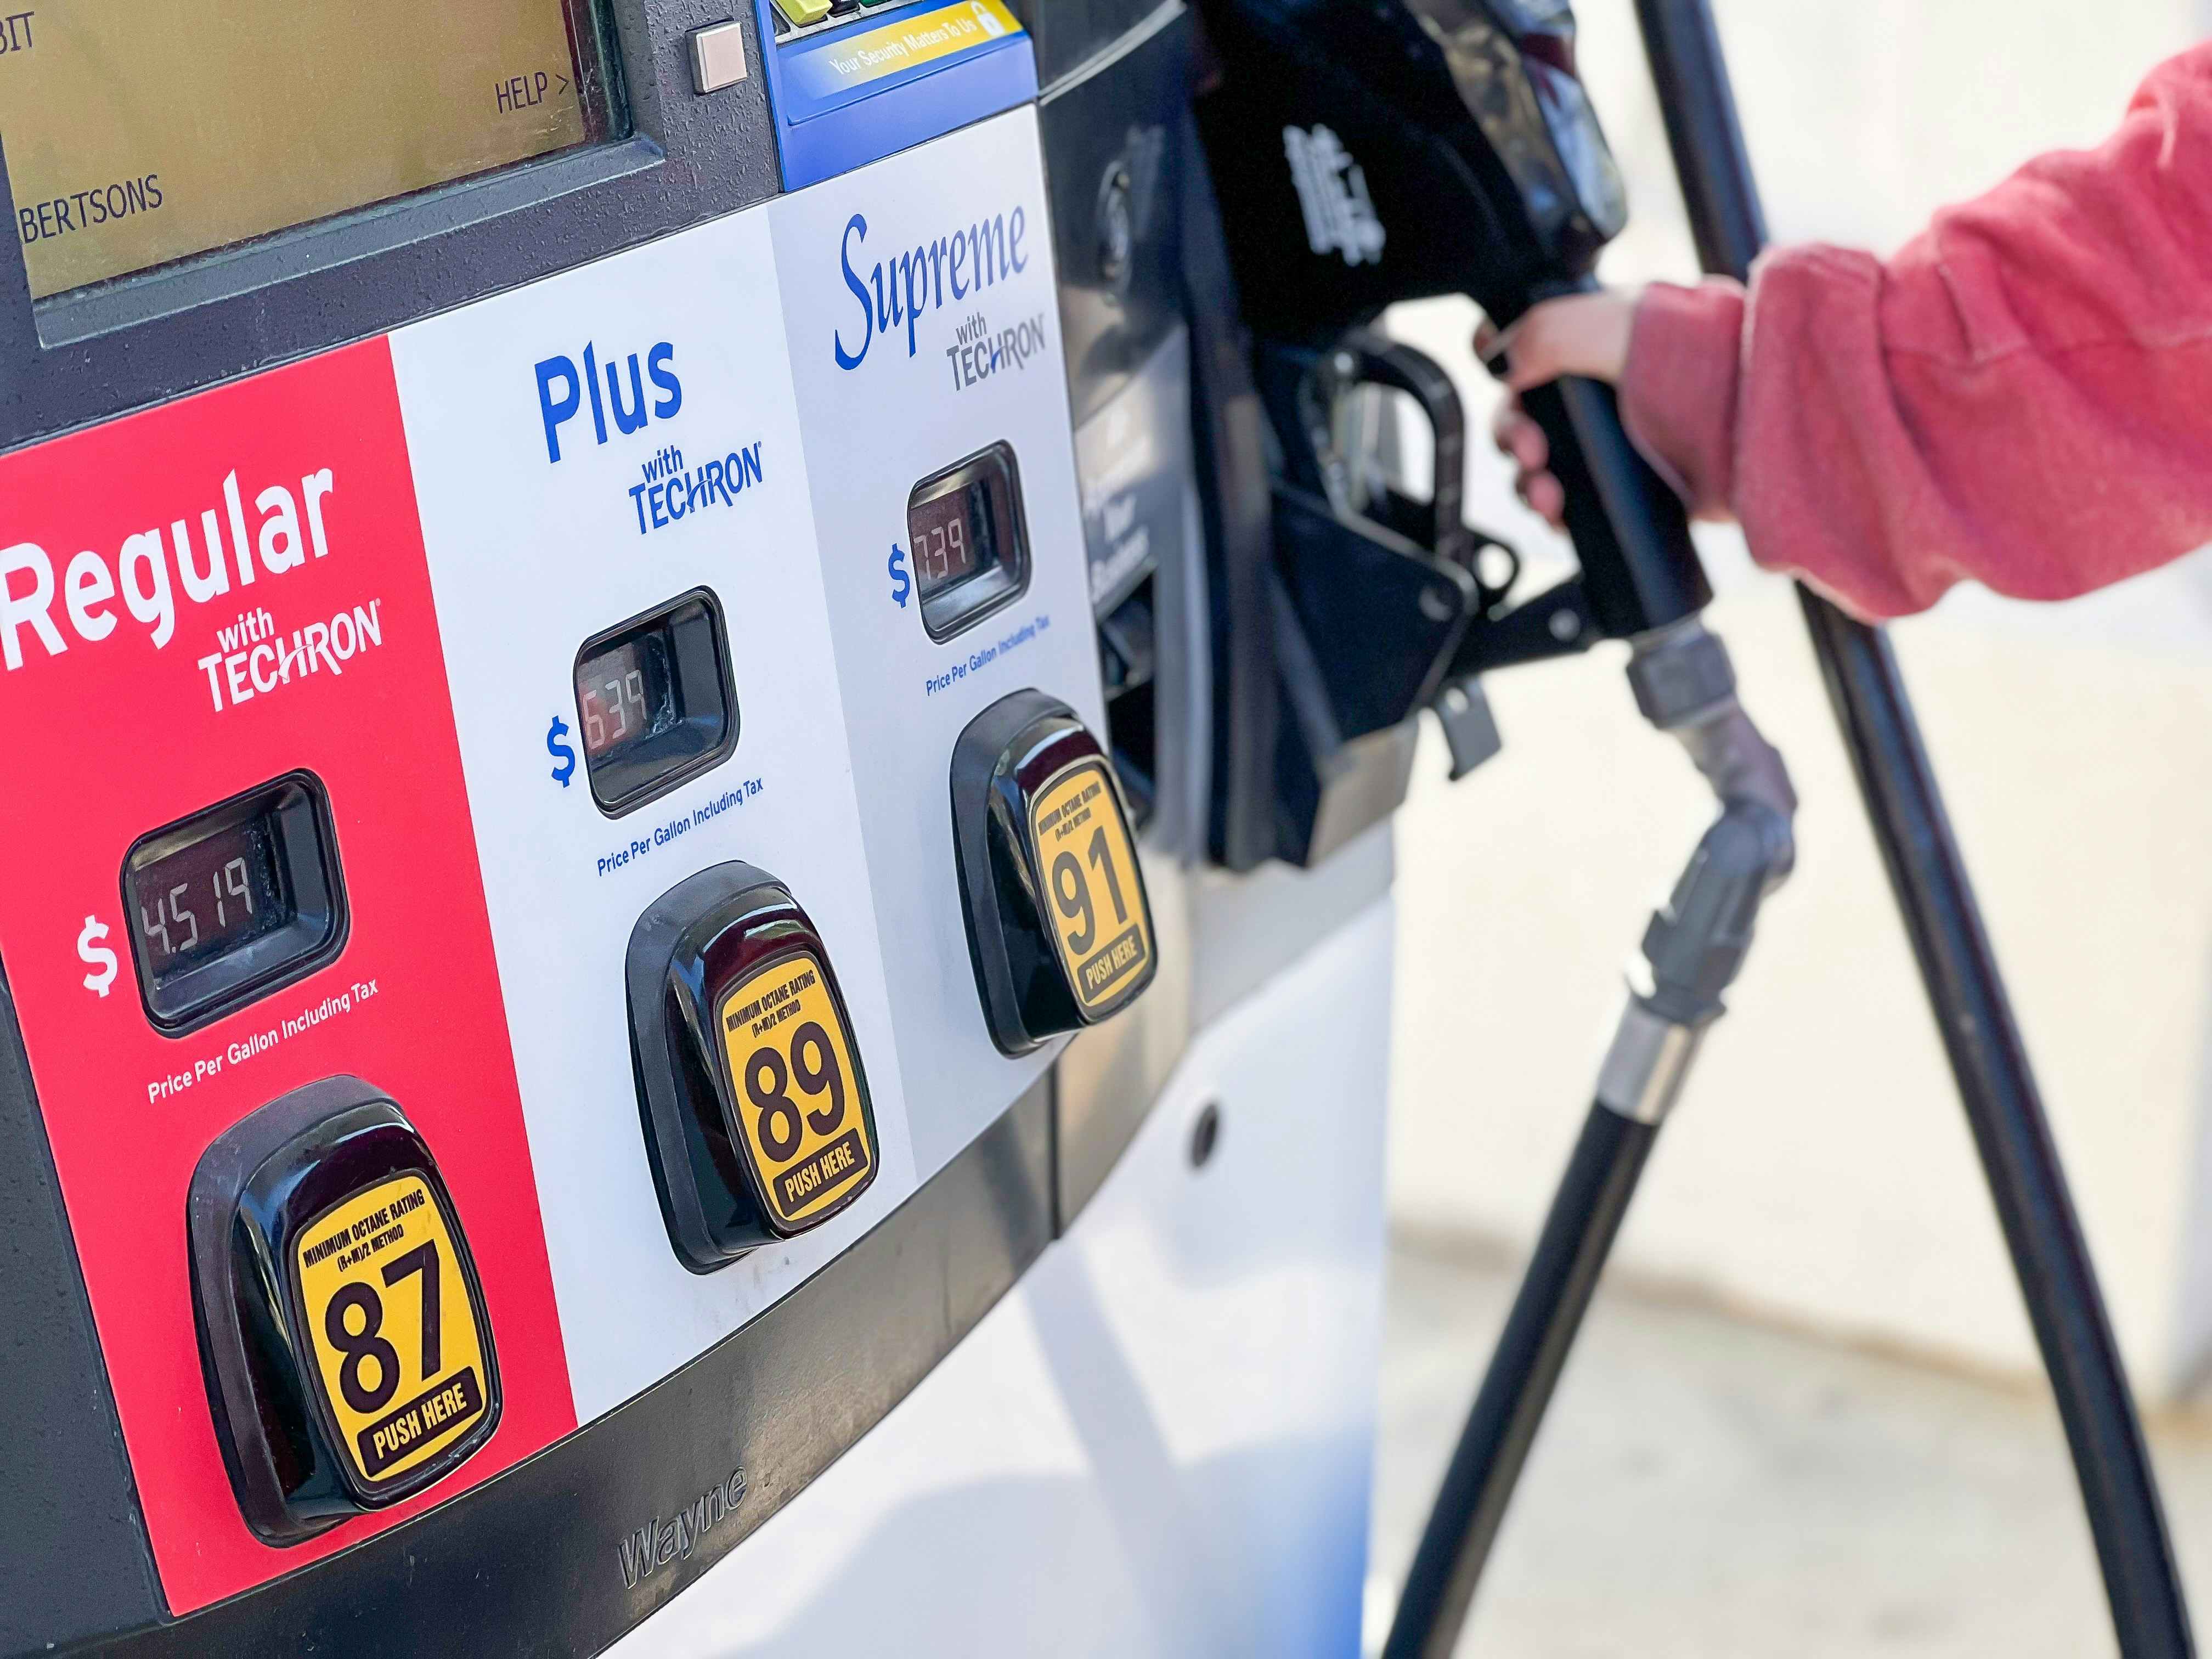 A person's hand reaching to take the nozzle from a gas pump with the fuel option buttons in the foreground.